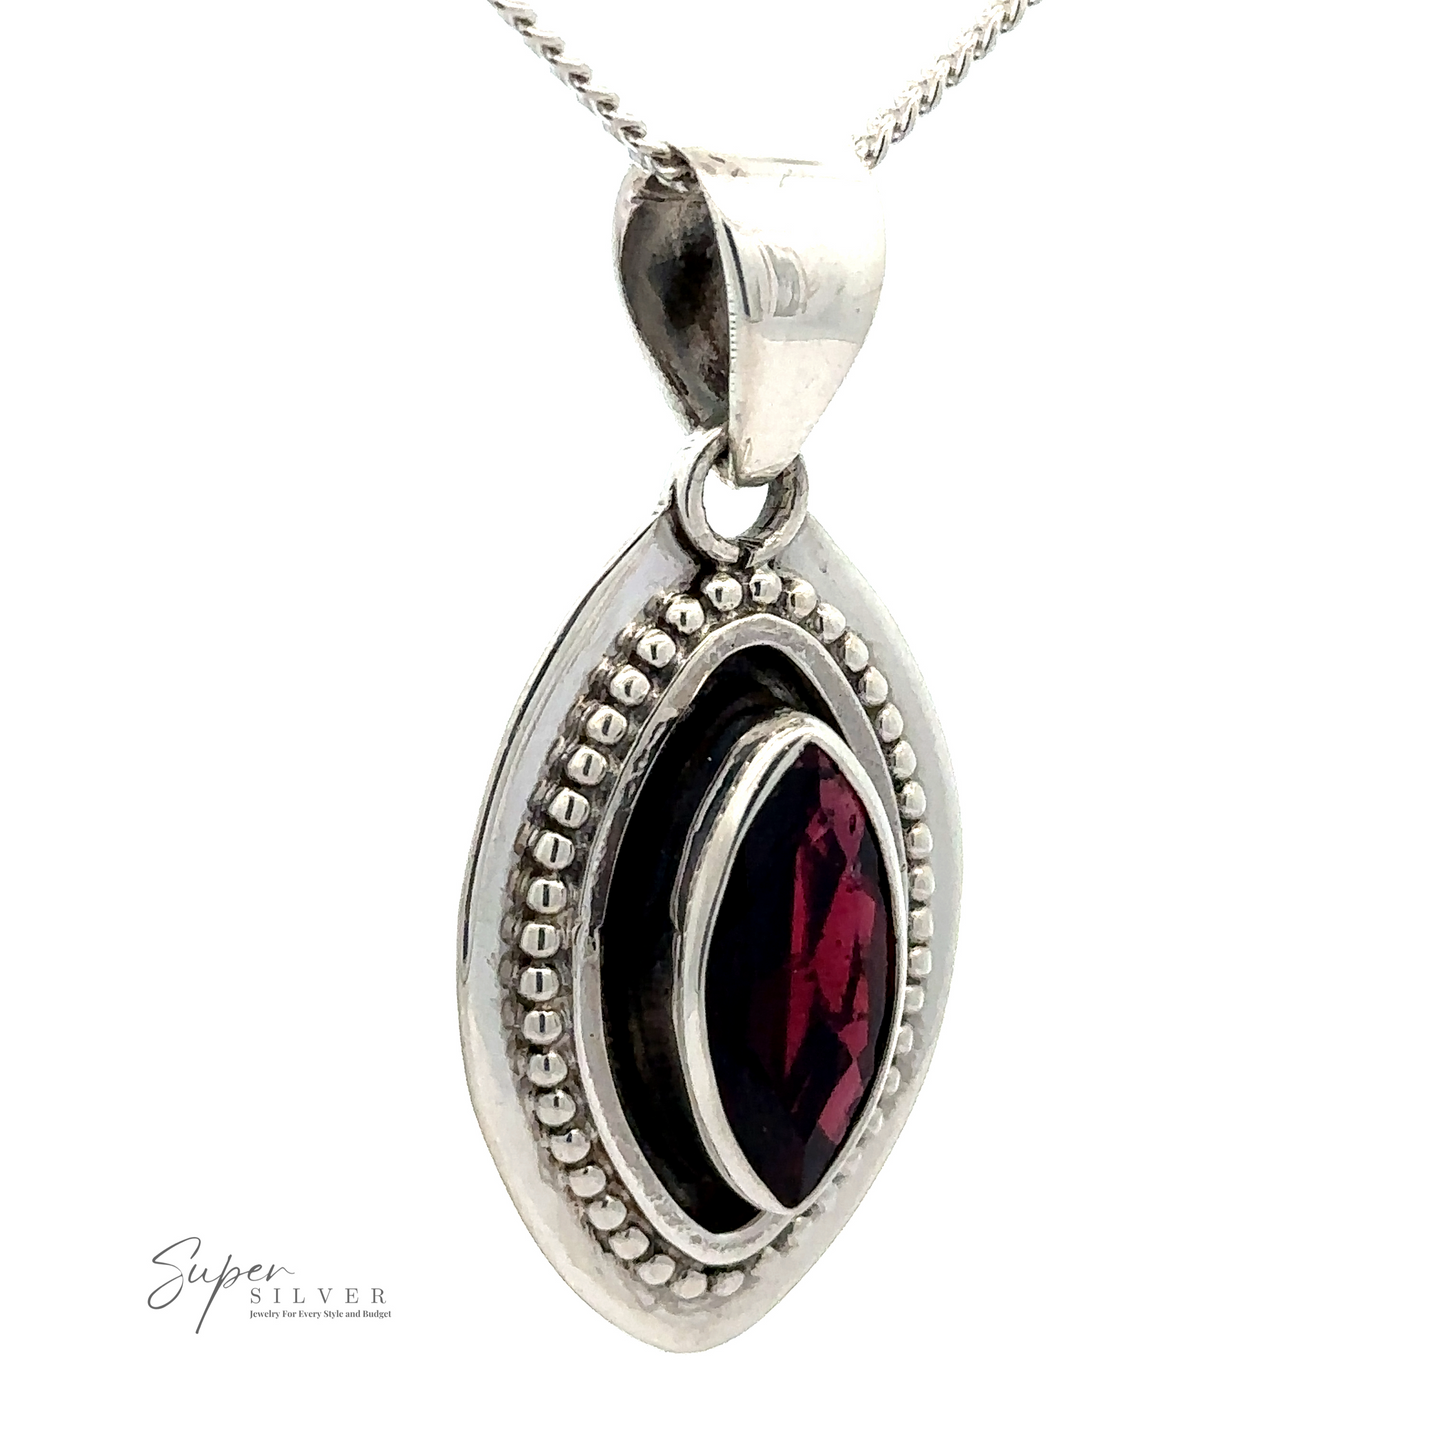 
                  
                    A Beautiful Marquise Pendant With Beaded Design with a marquise-shaped, deep red stone set in the center, surrounded by a beaded sterling silver frame. The necklace chain is partially visible. The word "Super Silver" is printed on the bottom left.
                  
                